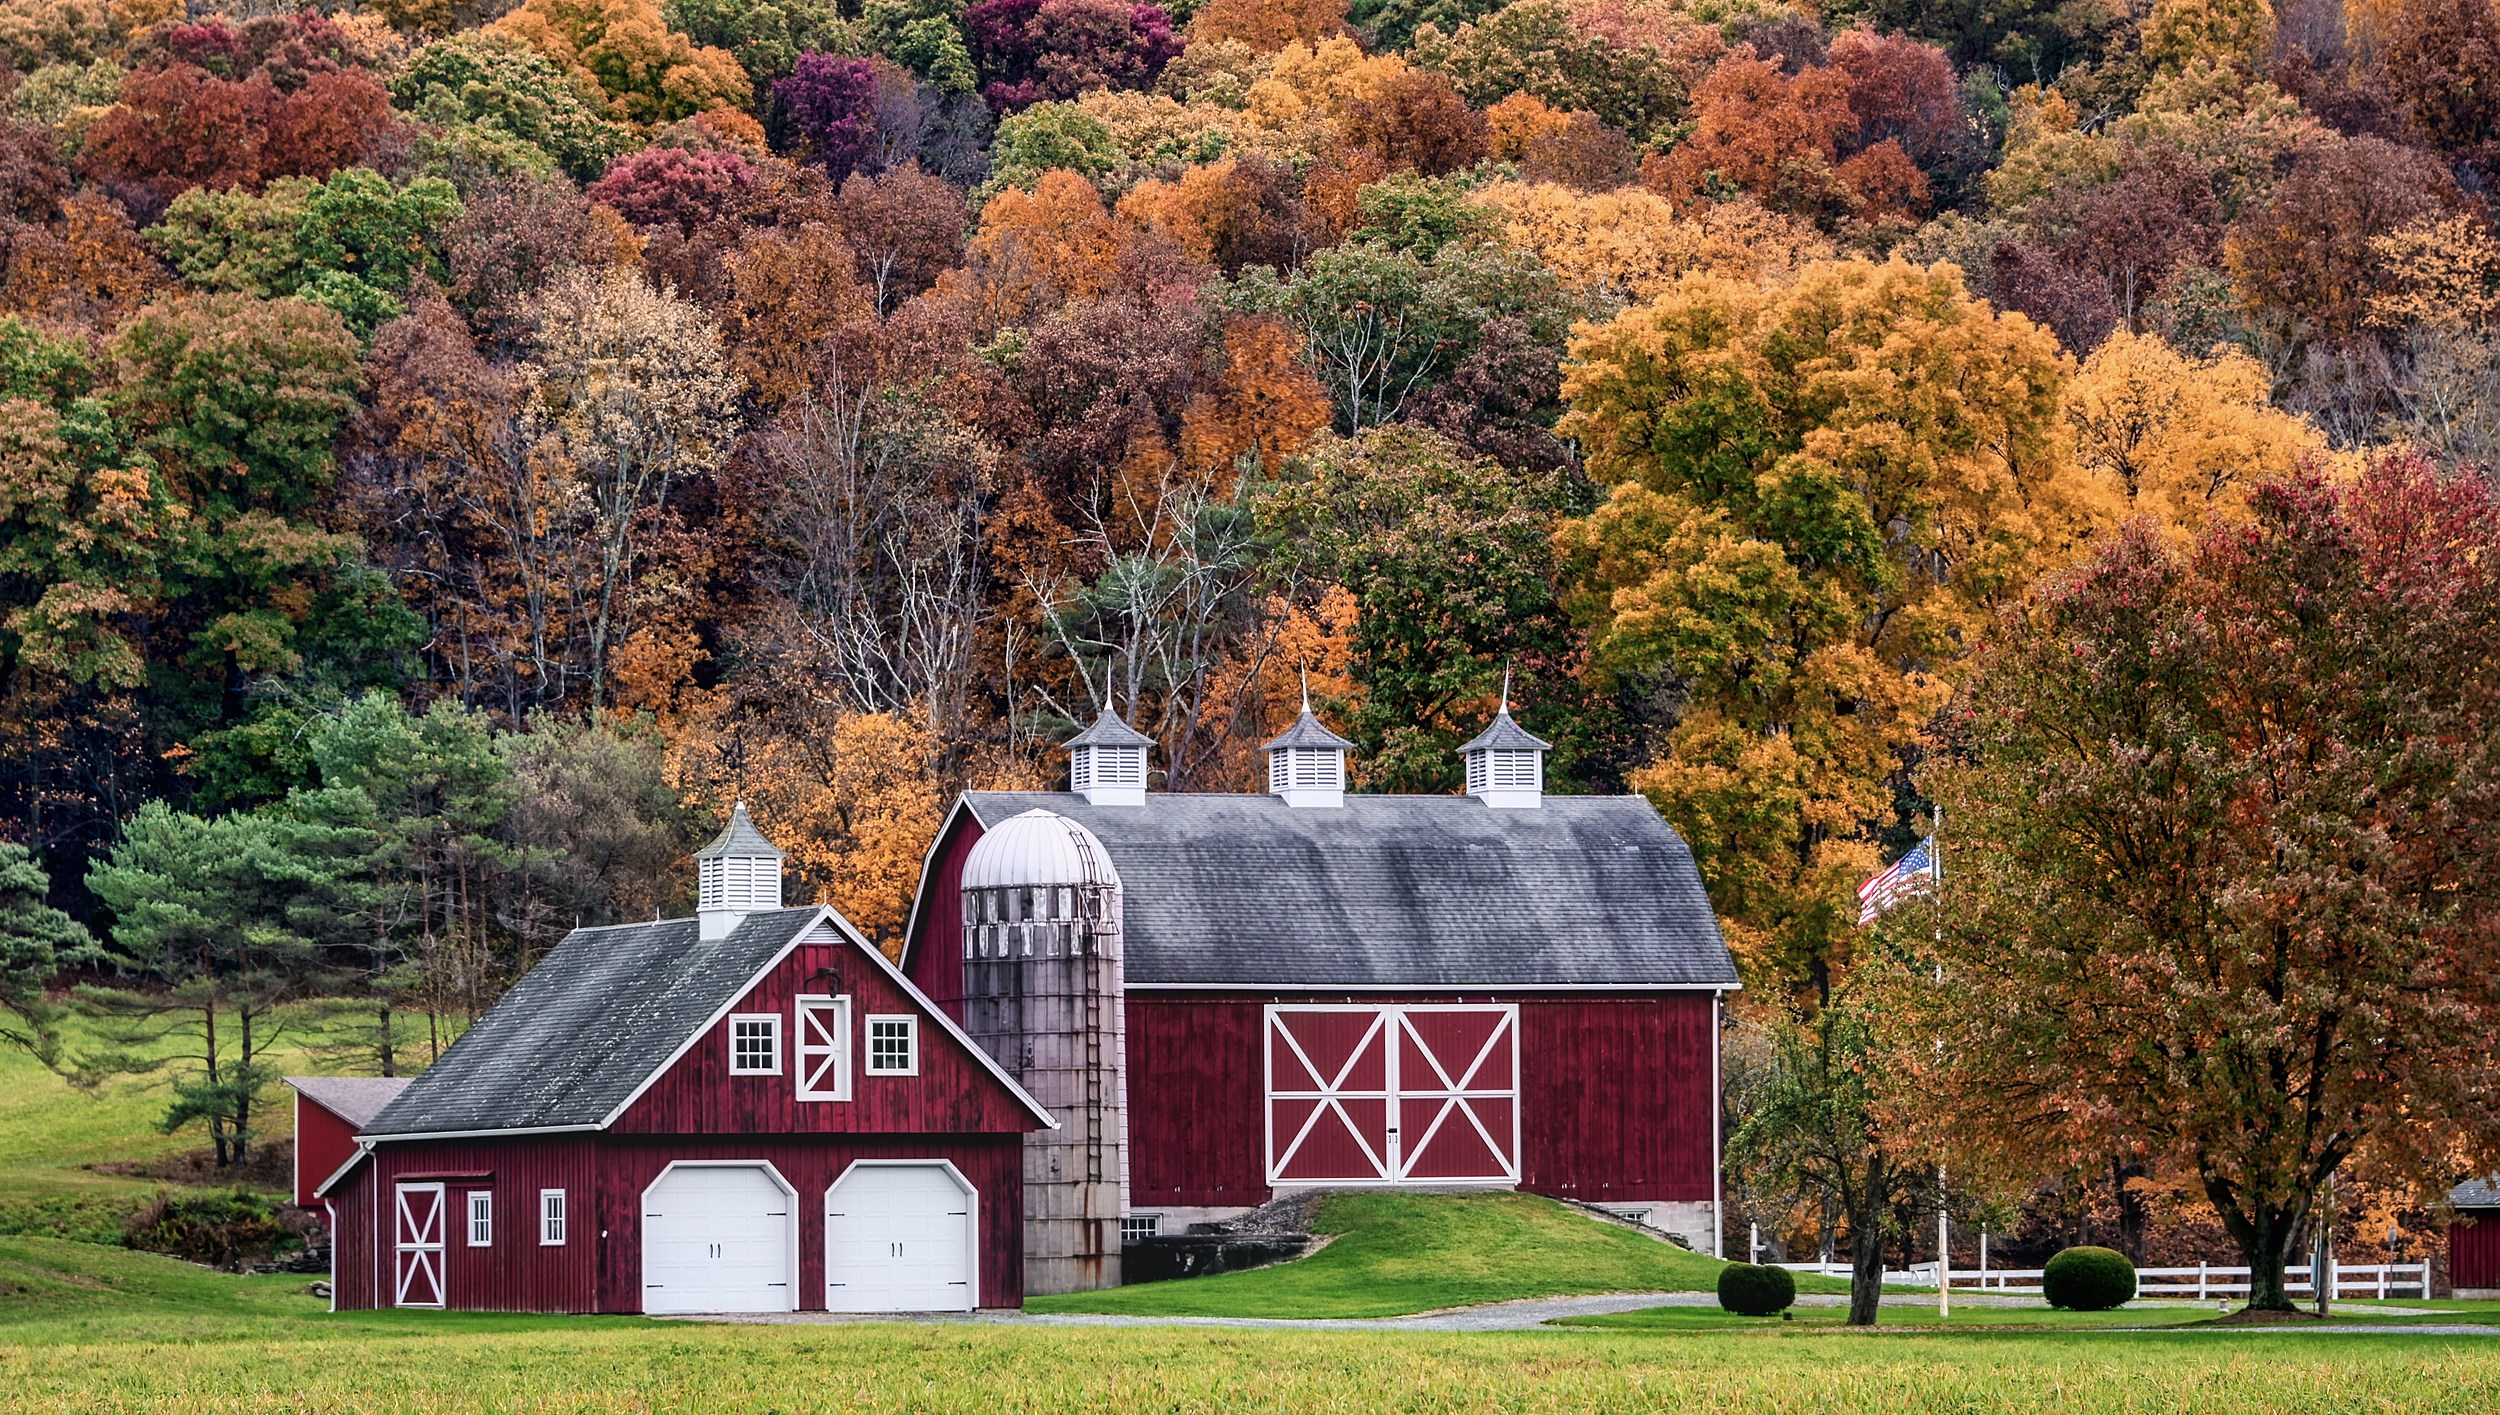 Peaceful Michigan Barn Photos Are Just What We Need Right Now